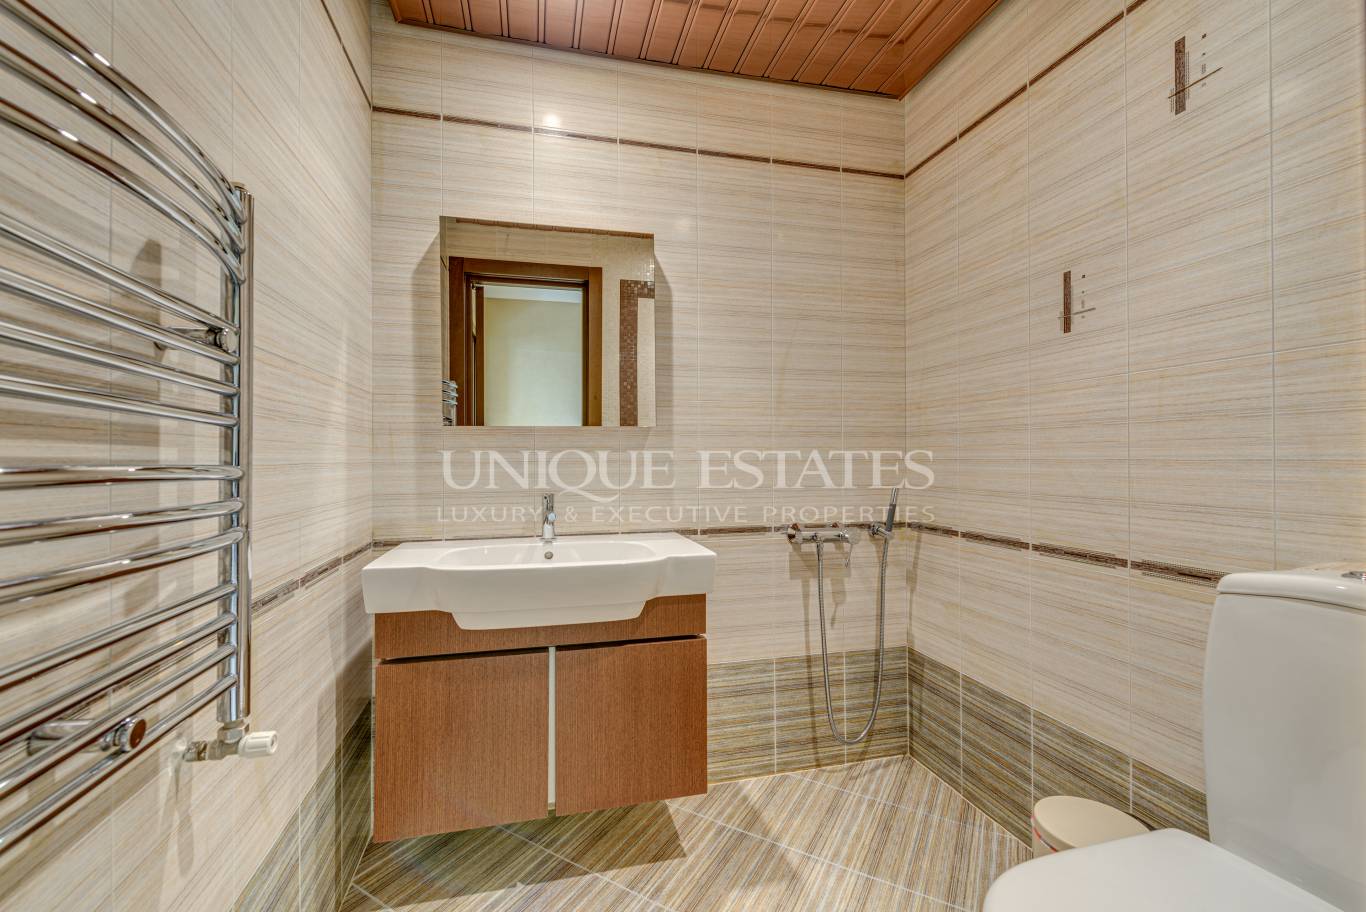 Apartment for sale in Sofia, Borovo with listing ID: K16114 - image 10